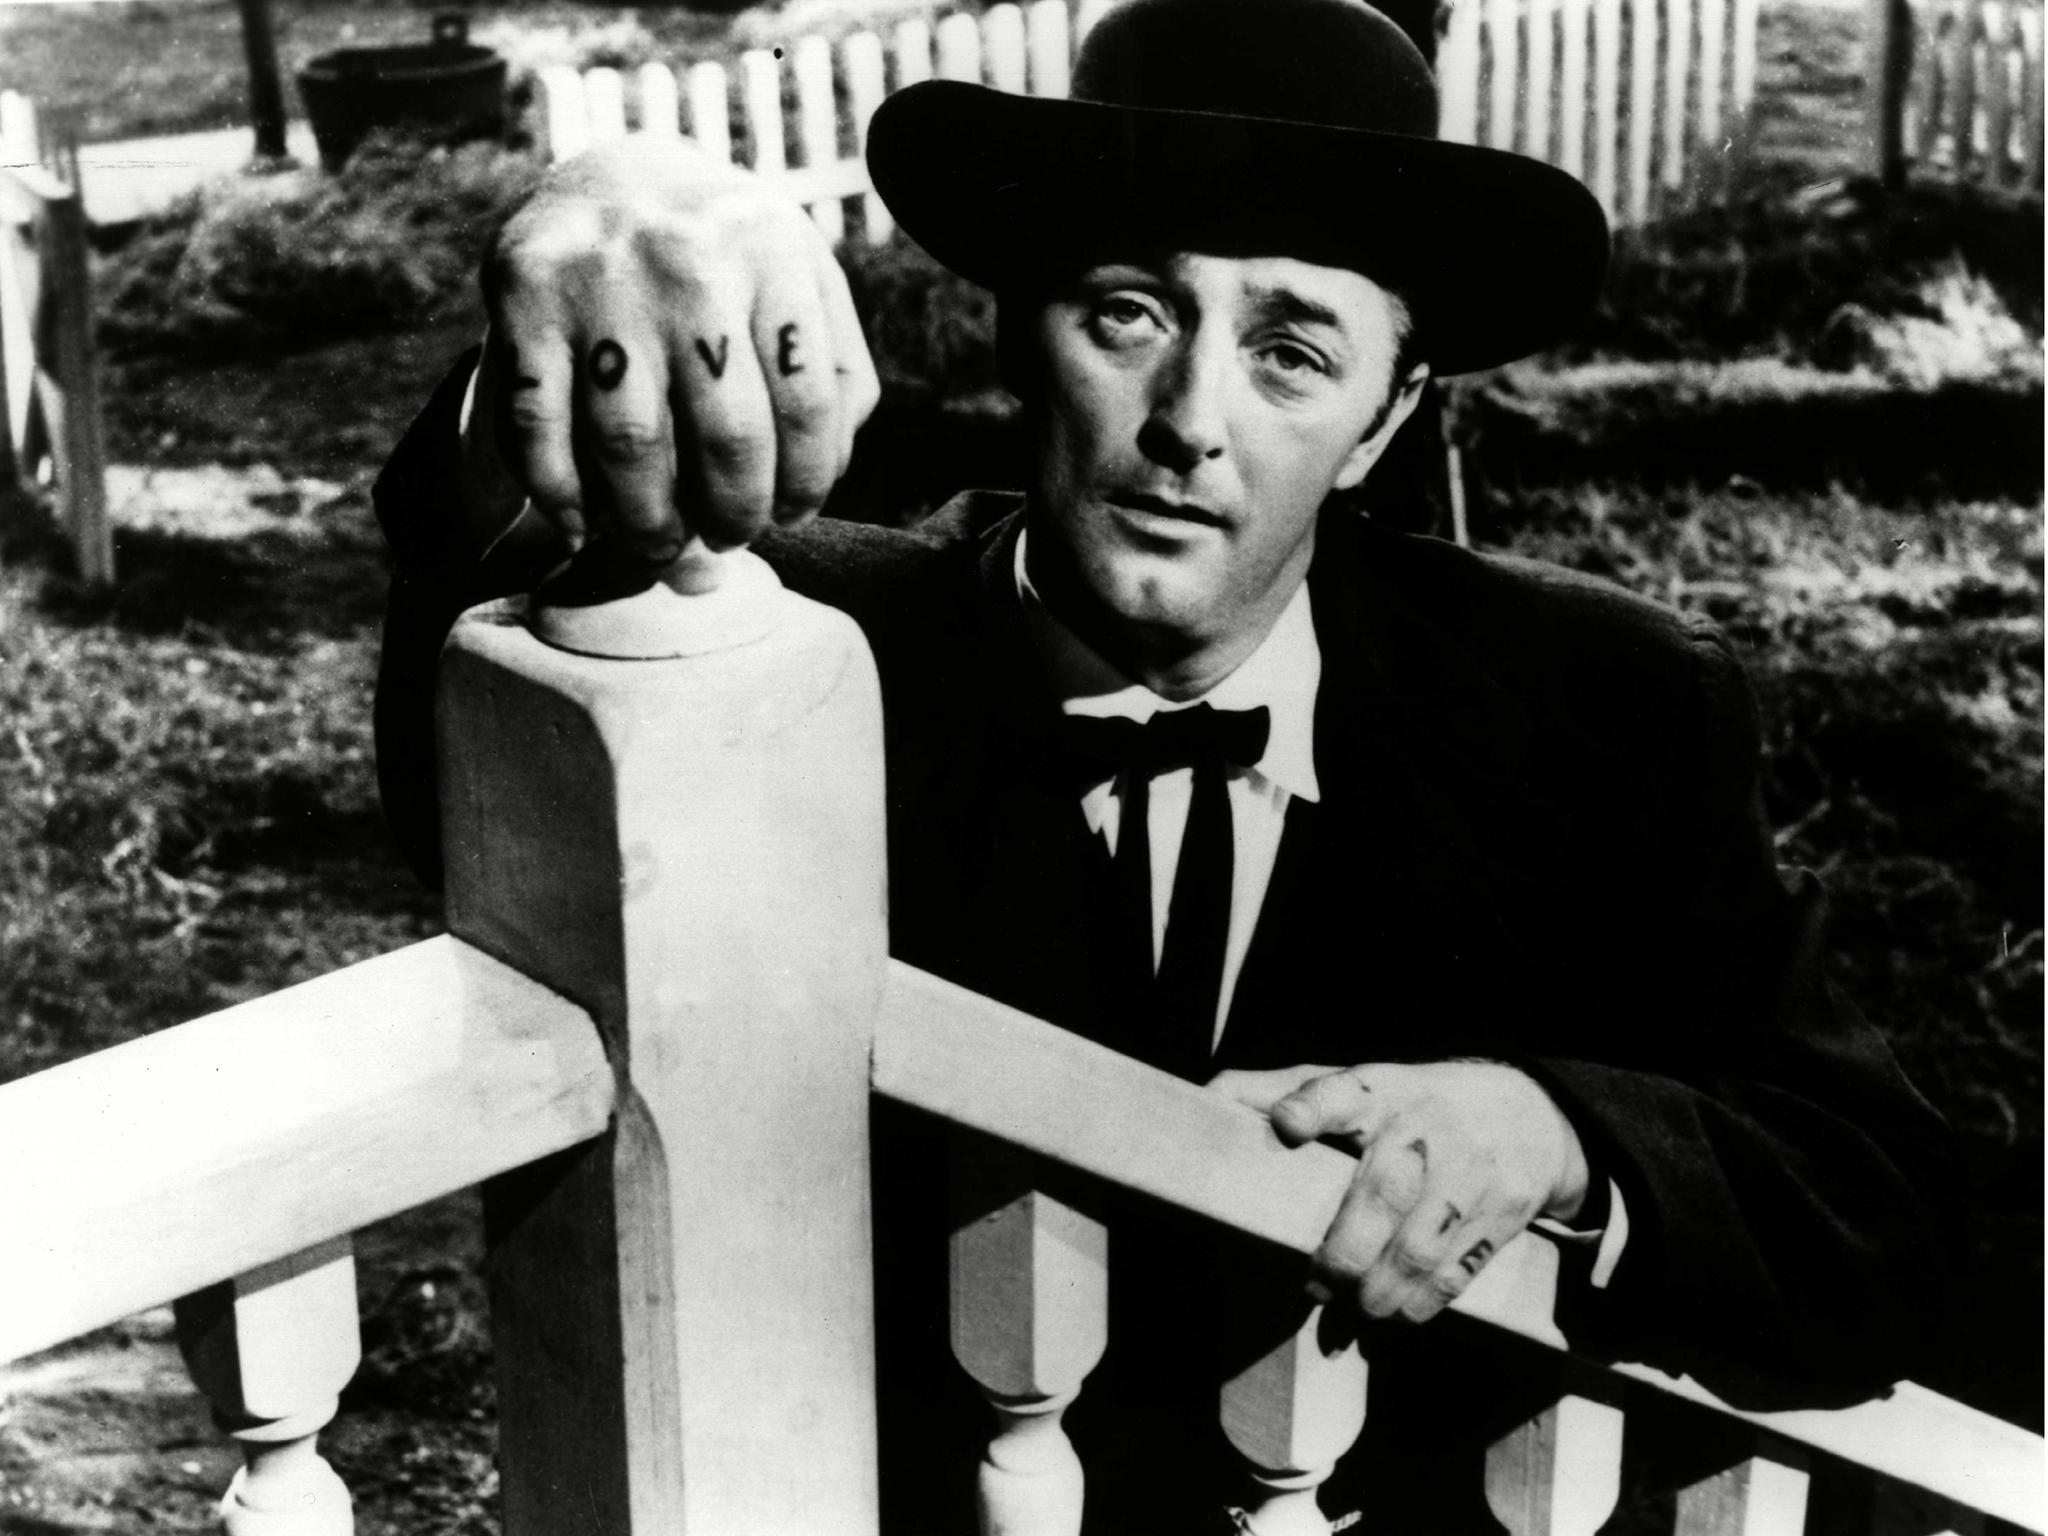 The Night Of The Hunter, 1955, starring Robert Mitchum, was directed by Charles Laughton. Mitchum considered him the best director he ever worked with